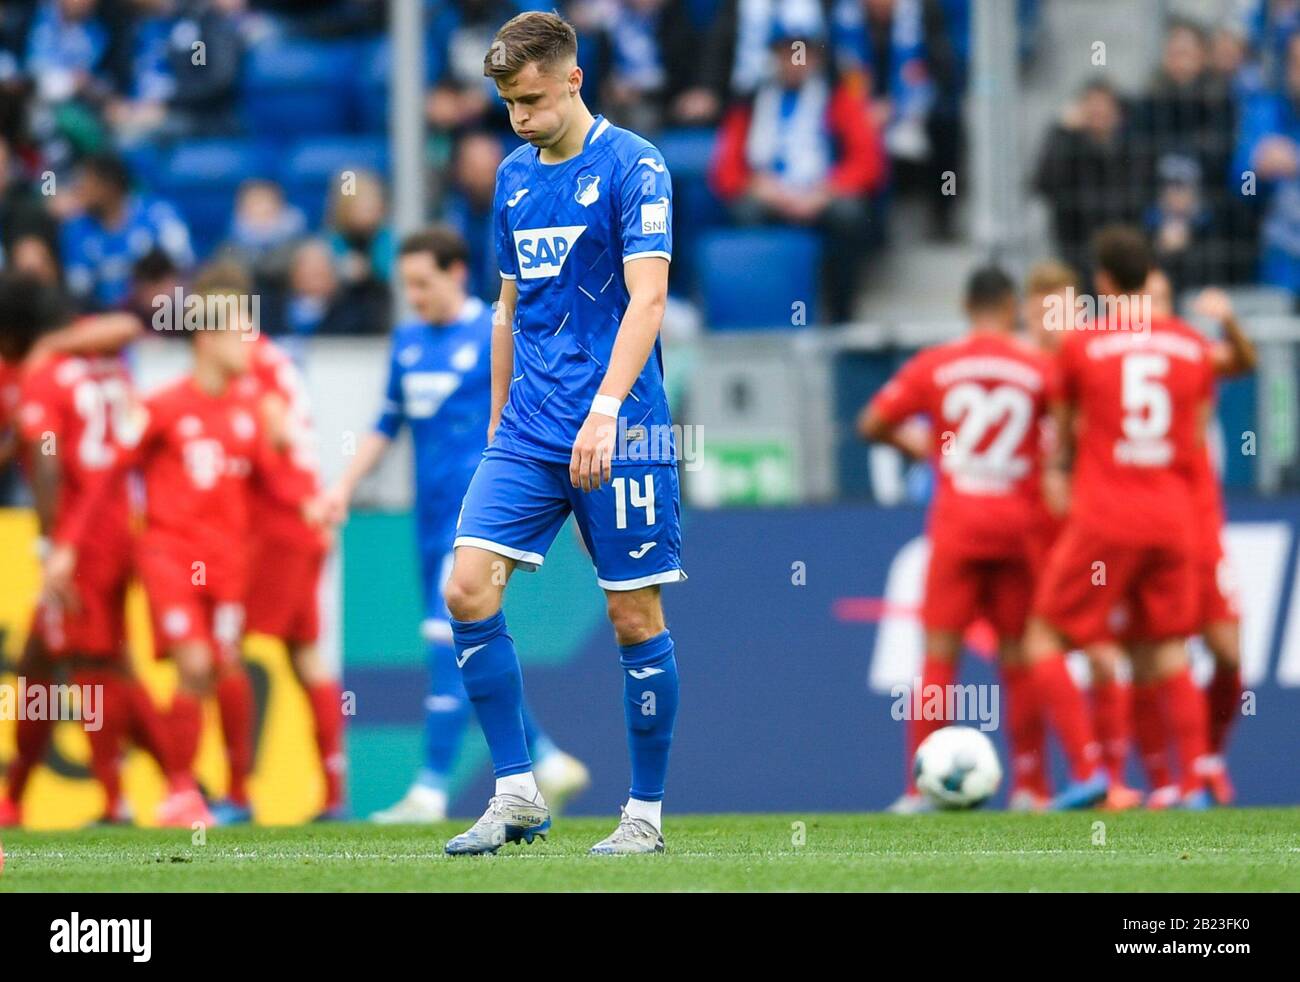 Sinsheim, Germany. 29th Feb, 2020. Football: Bundesliga, 24th matchday, 1899 Hoffenheim - Bayern Munich, PreZero Arena. Hoffenheim's Christoph Baumgartner crosses the square disappointed. In the background the players of FC Bayer Munich are cheering for the 0:3. Credit: Tom Weller/dpa - IMPORTANT NOTE: In accordance with the regulations of the DFL Deutsche Fußball Liga and the DFB Deutscher Fußball-Bund, it is prohibited to exploit or have exploited in the stadium and/or from the game taken photographs in the form of sequence images and/or video-like photo series./dpa/Alamy Live News Credit: d Stock Photo